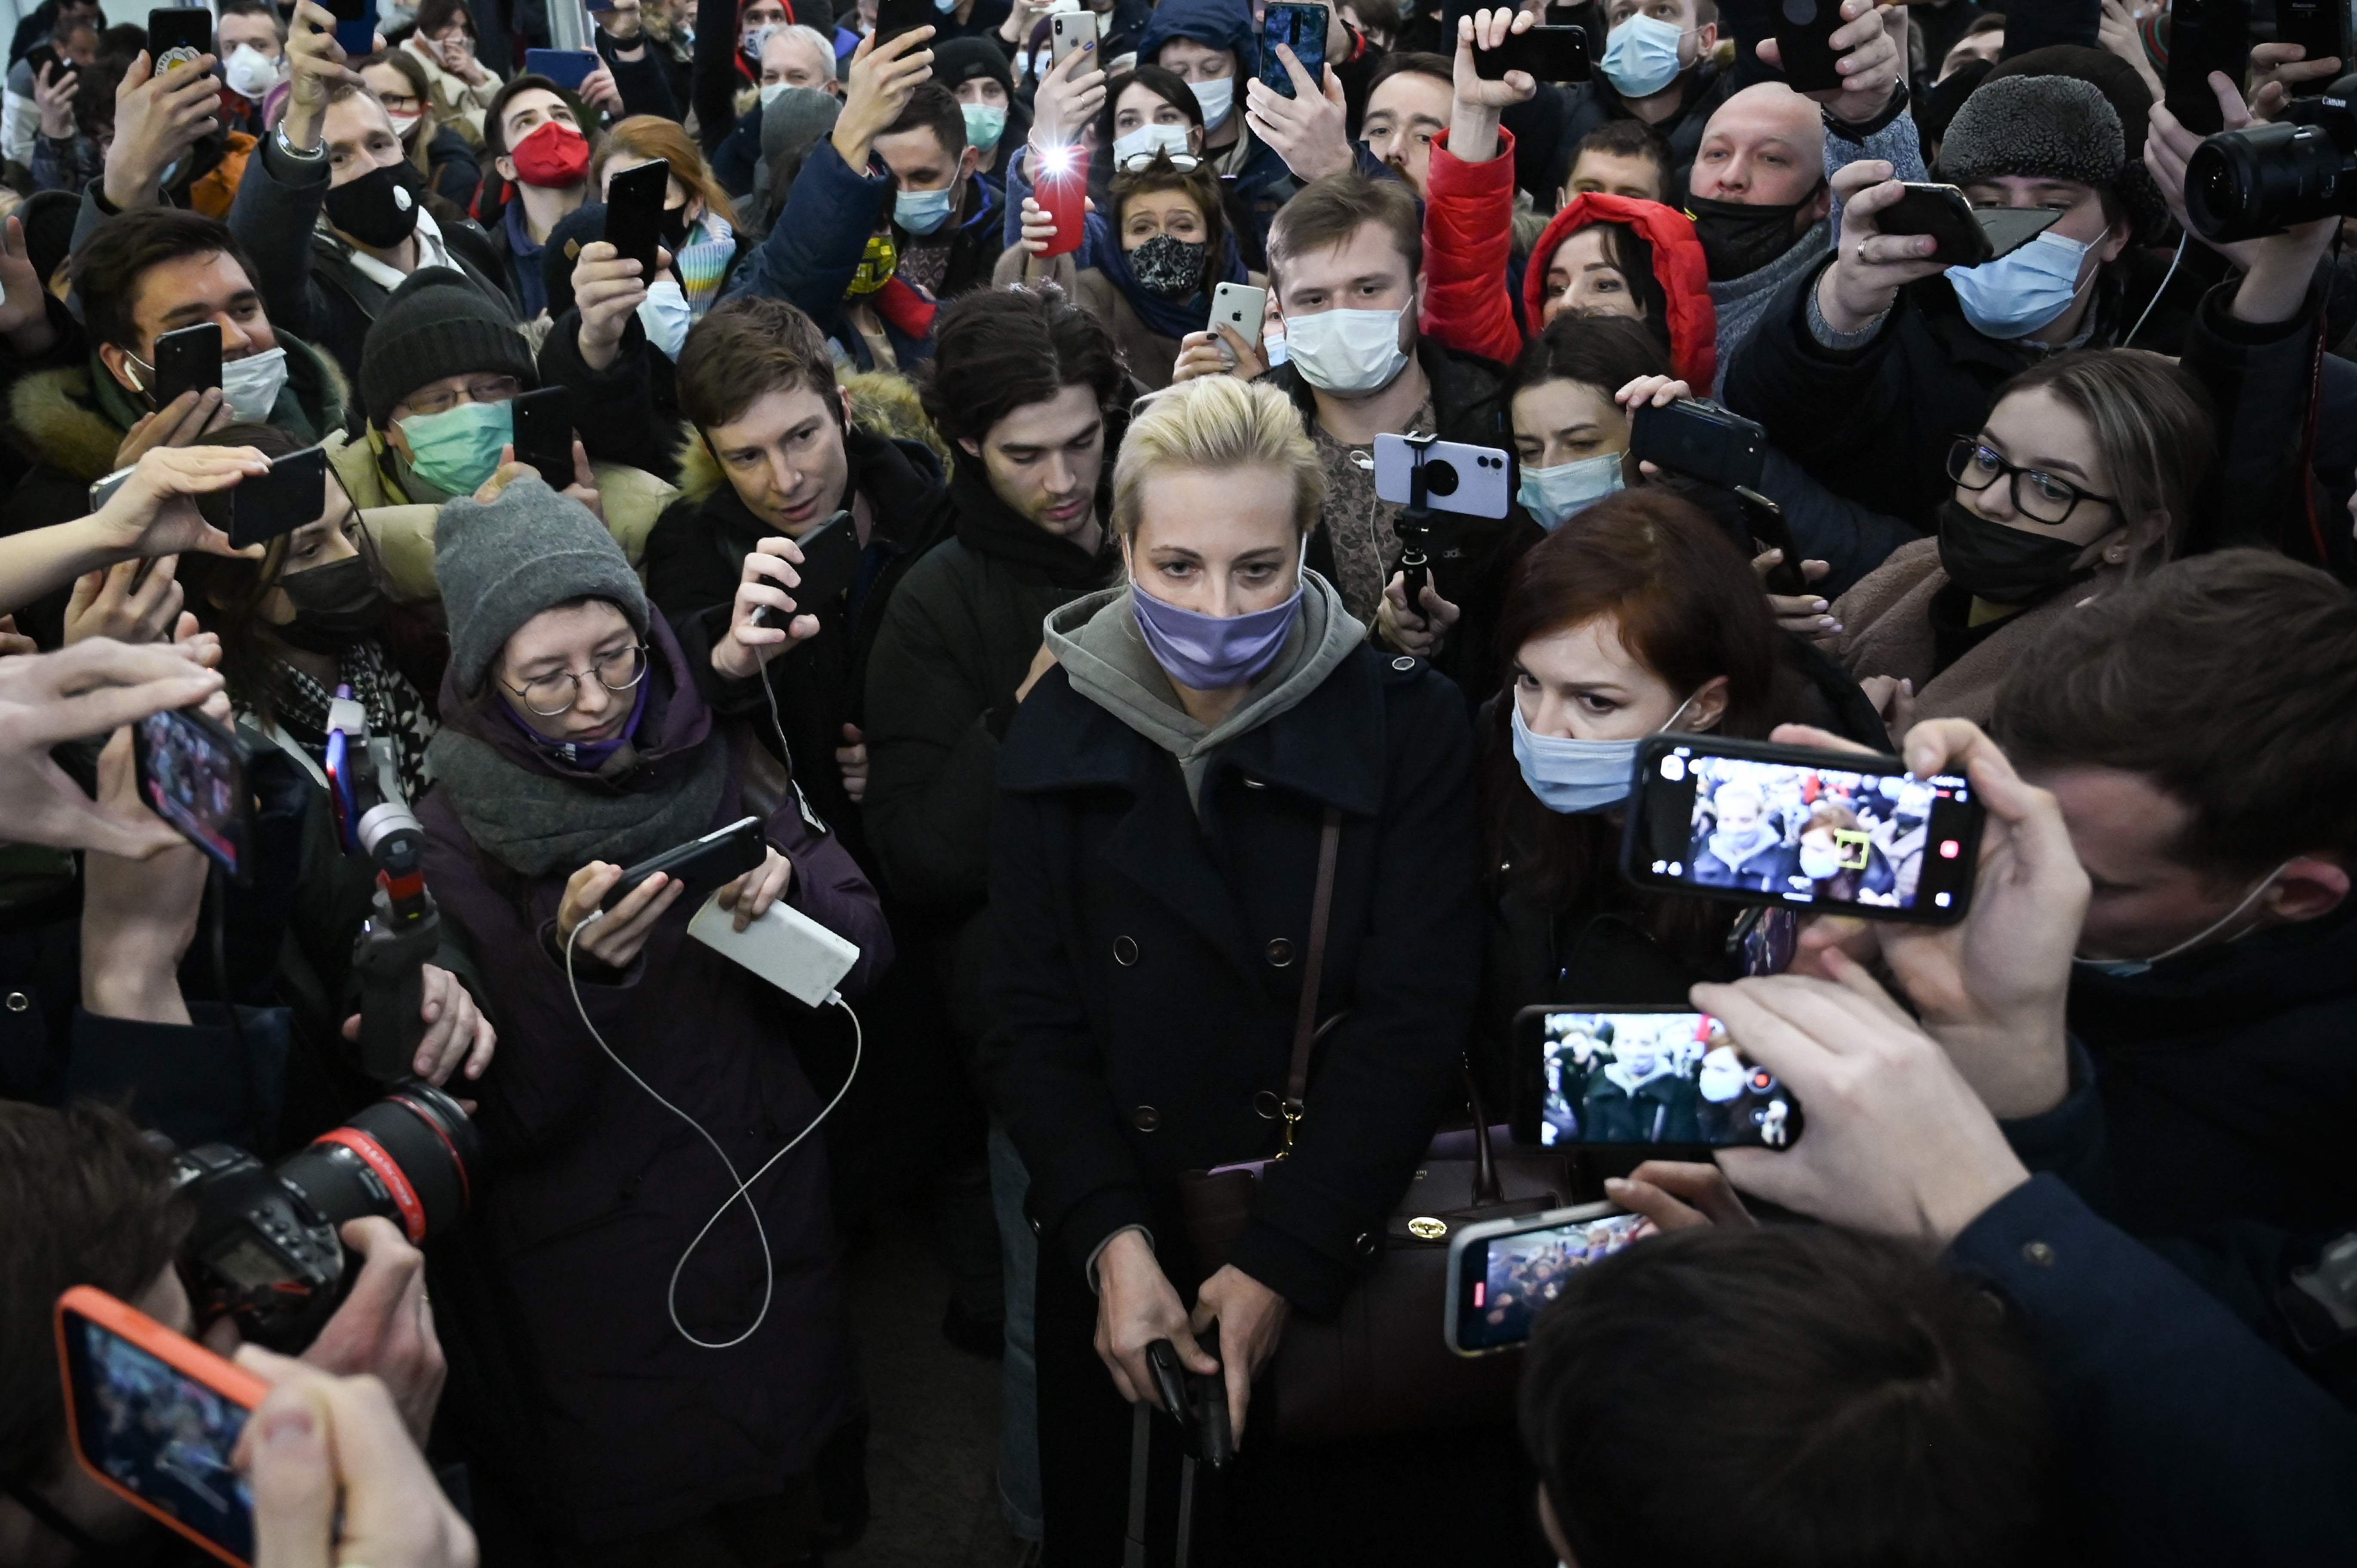 Yulia surrounded by people as she leaves Moscow’s Sheremetyevo airport after her husband’s arrest earlier this month